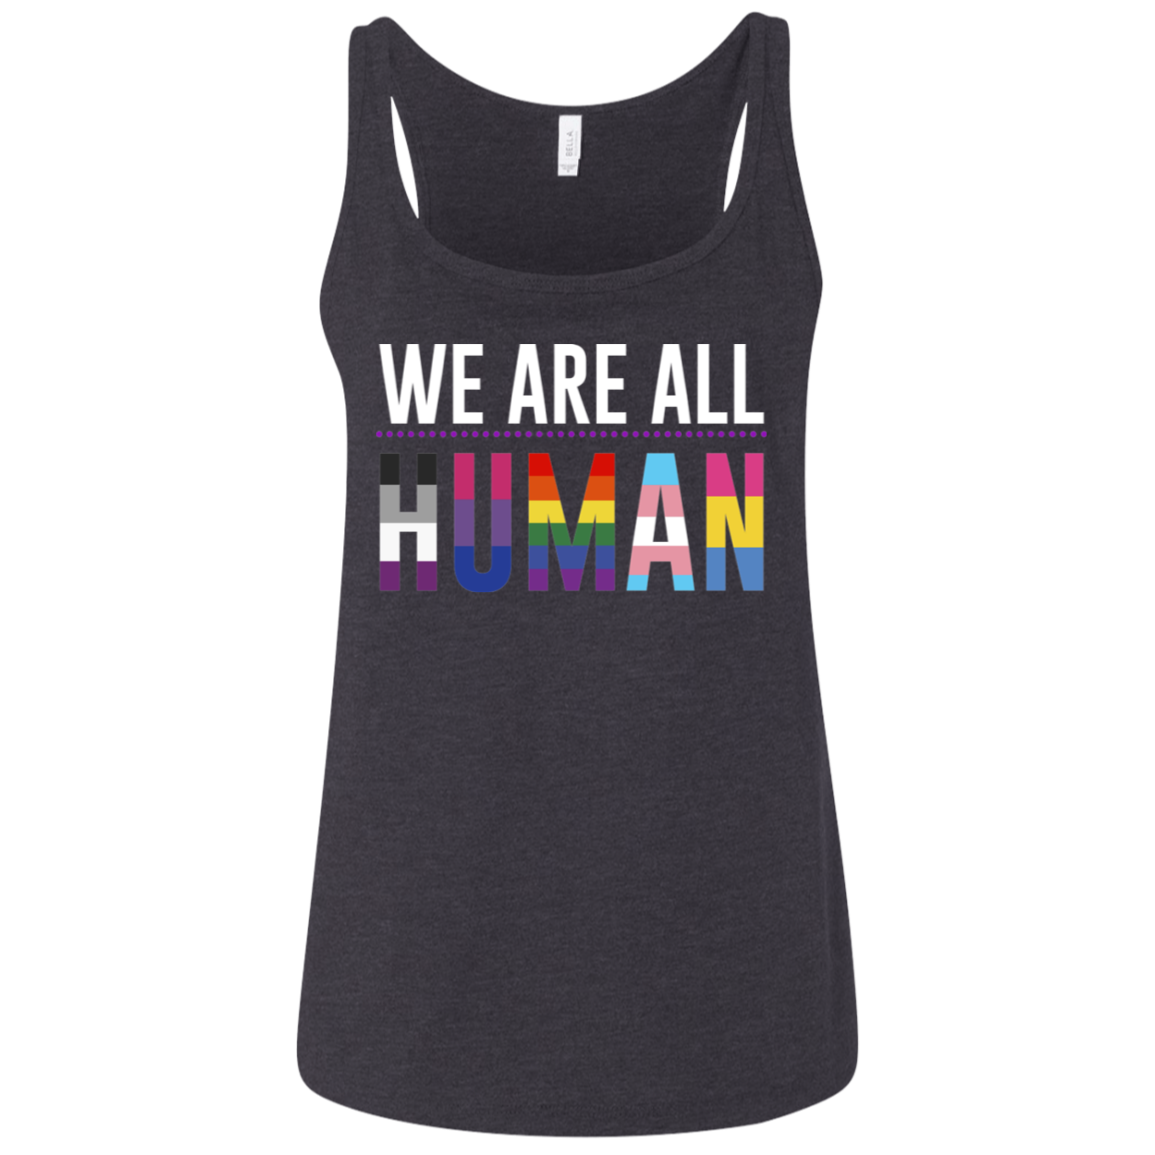 We Are All Human black Tank top for women, equality tank top for women